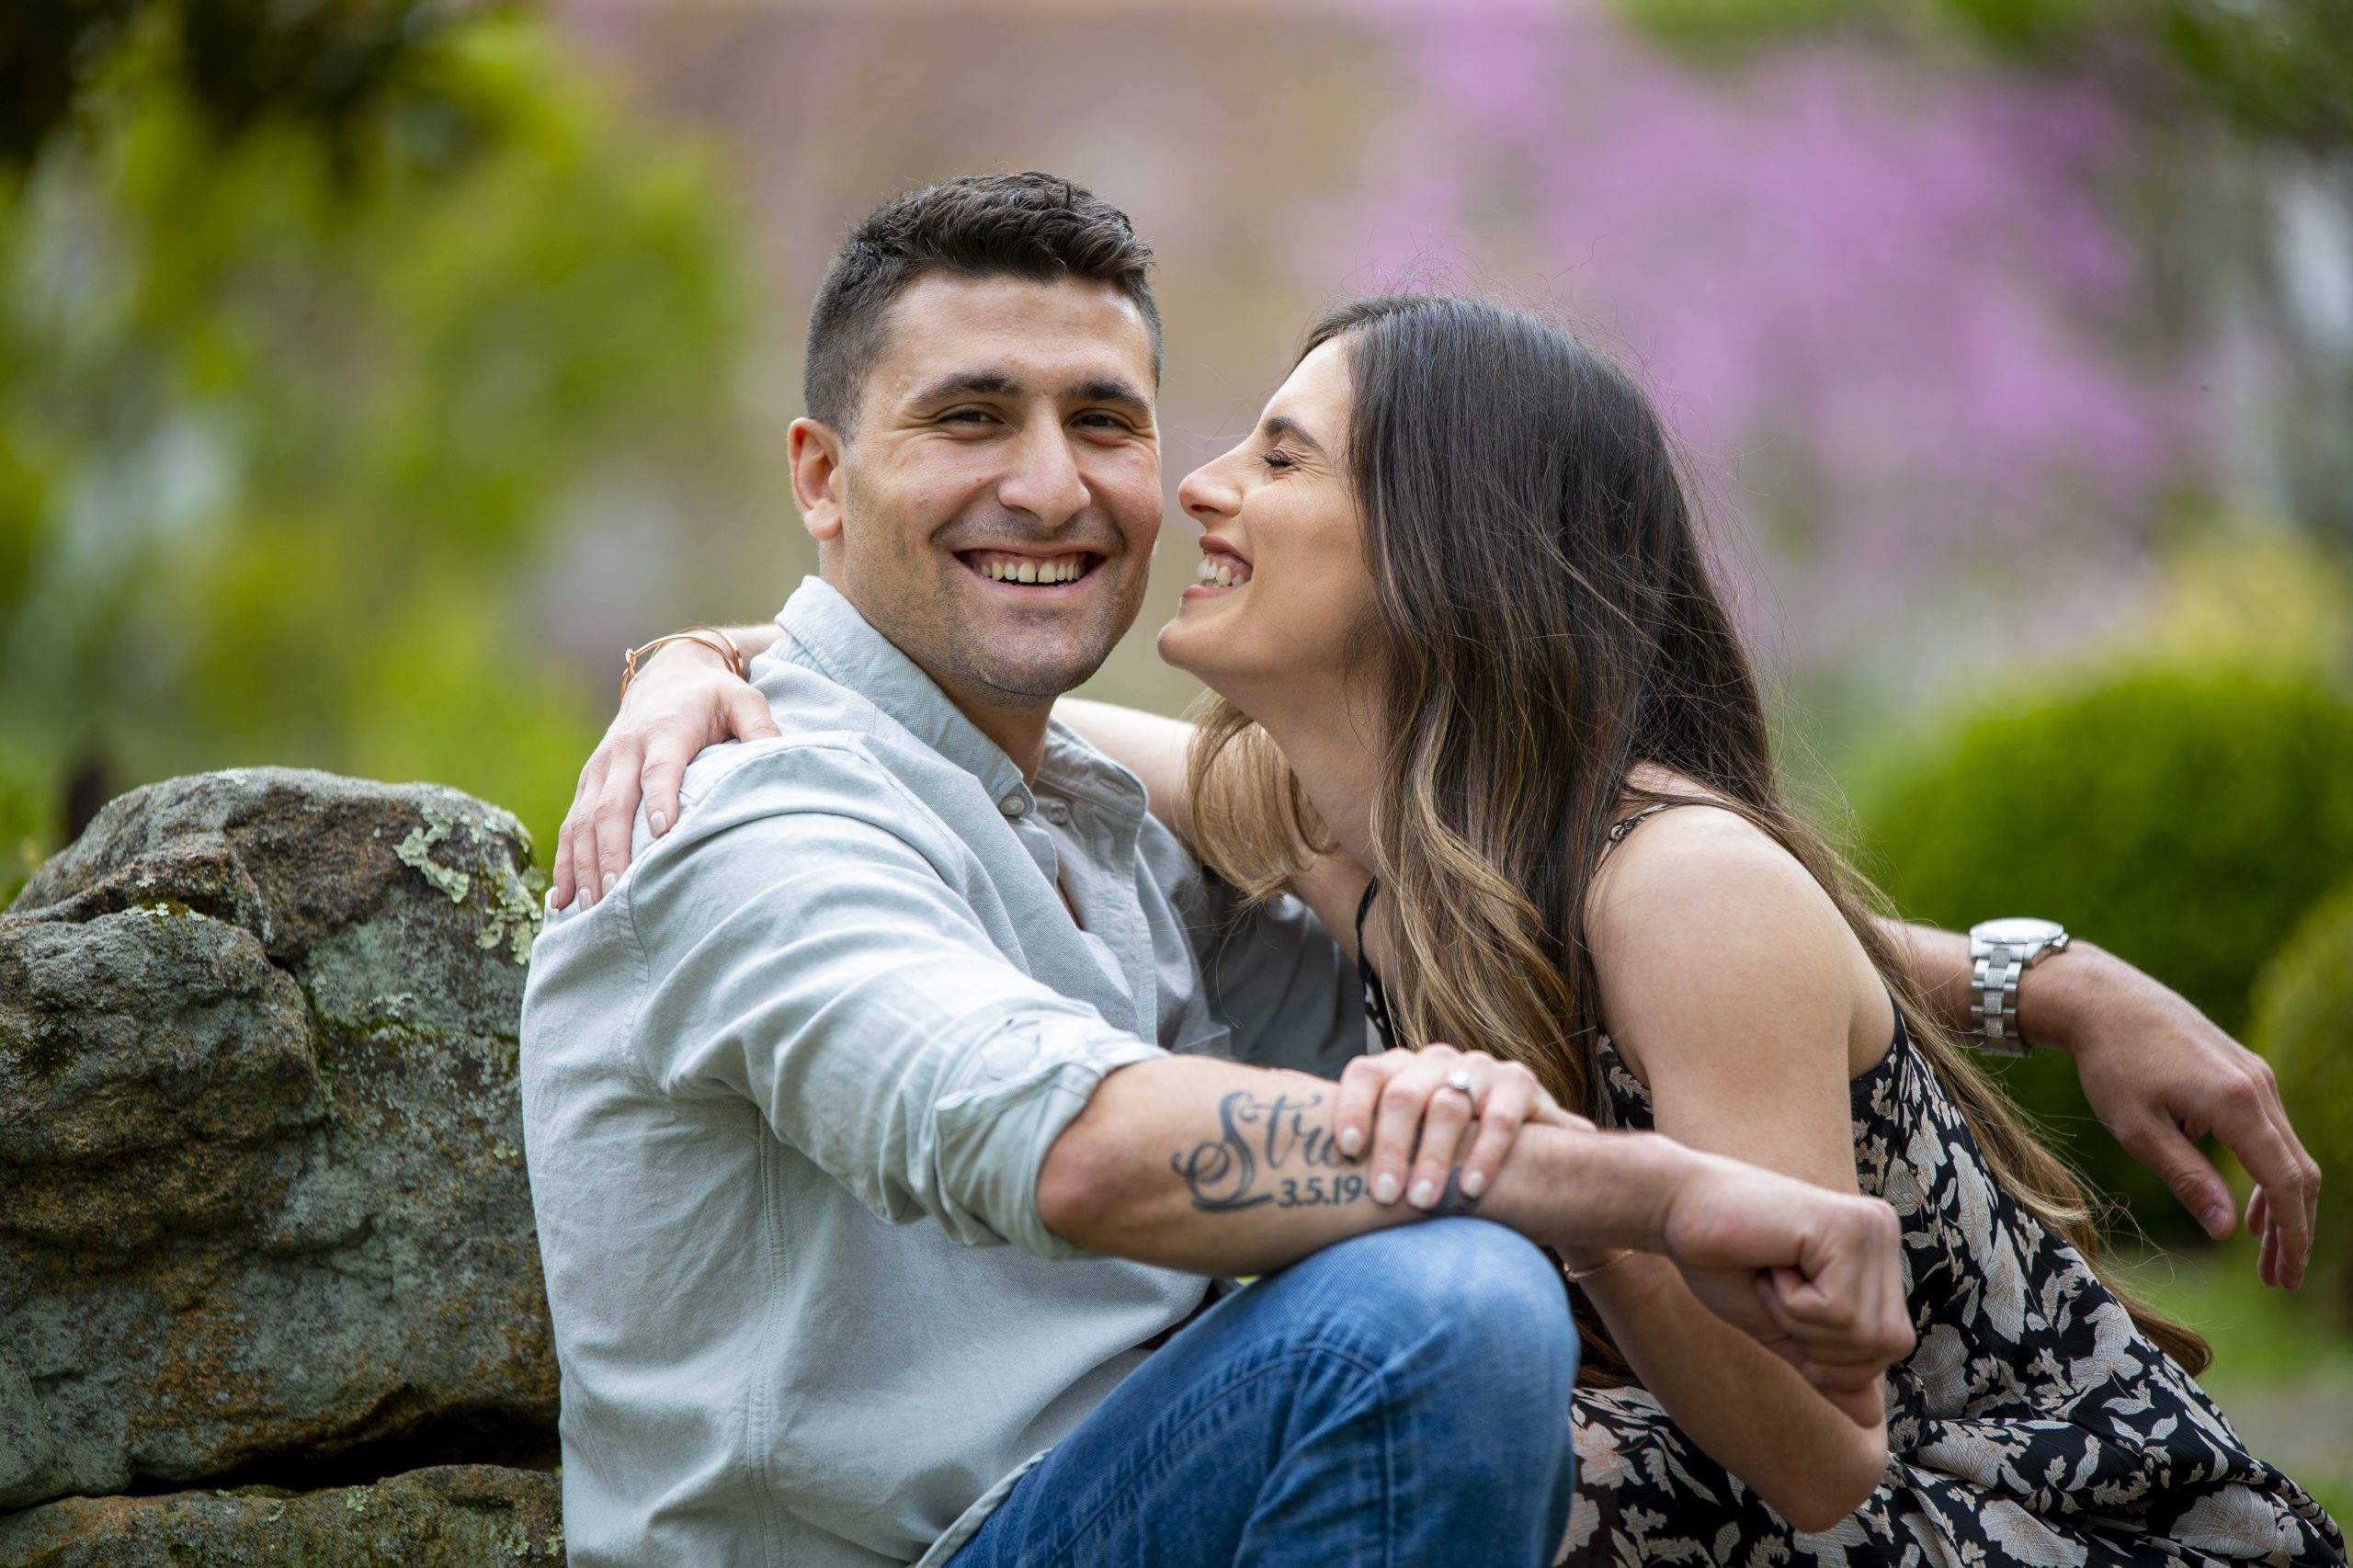 A couple is posing for an engagement photo in a park.